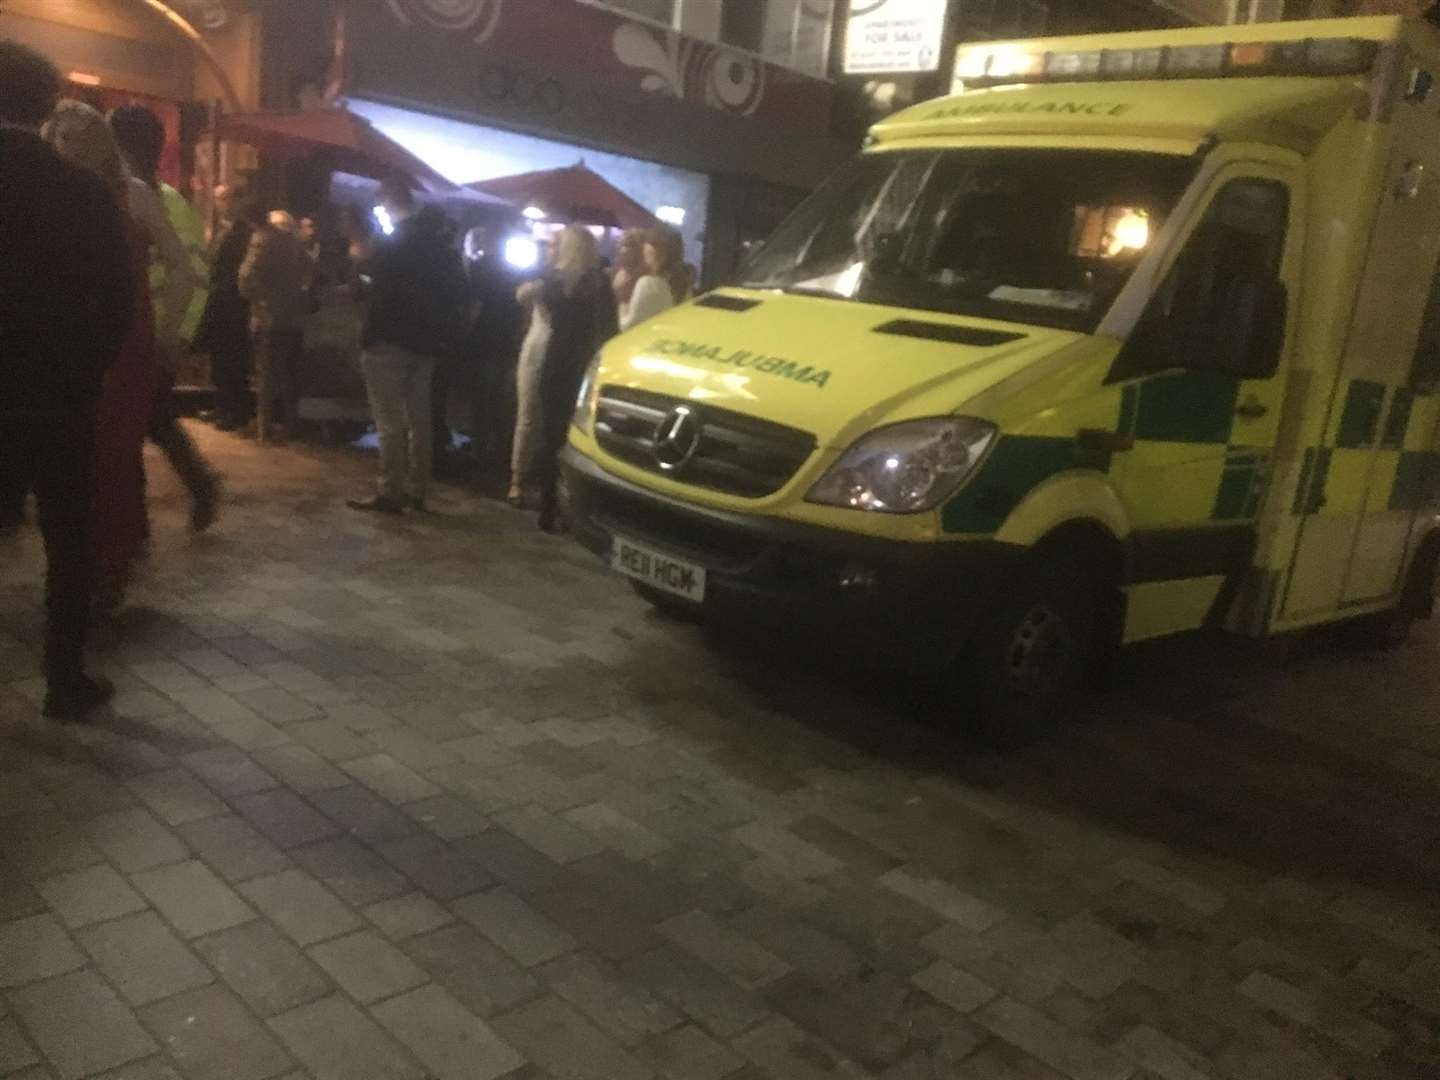 Police and paramedics were called to Bank Street in the early hours